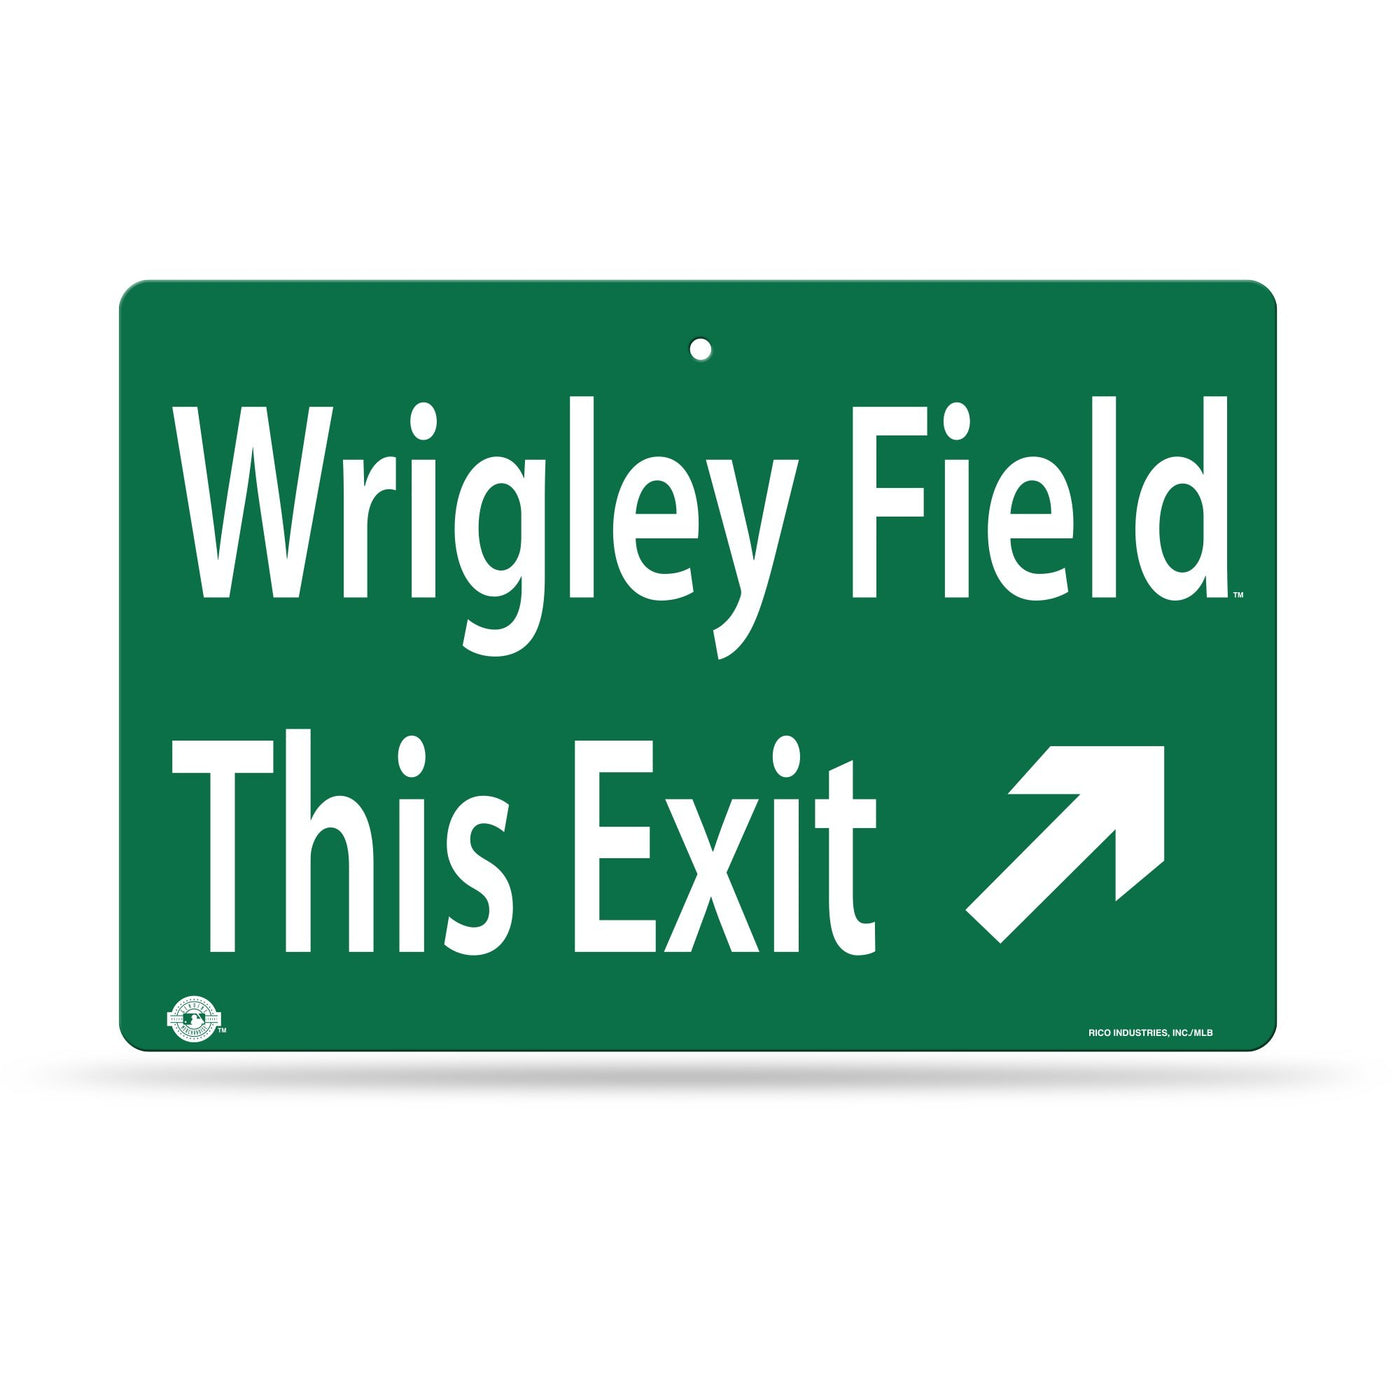 WRIGLEY FIELD STREET EXIT SIGN - Ivy Shop